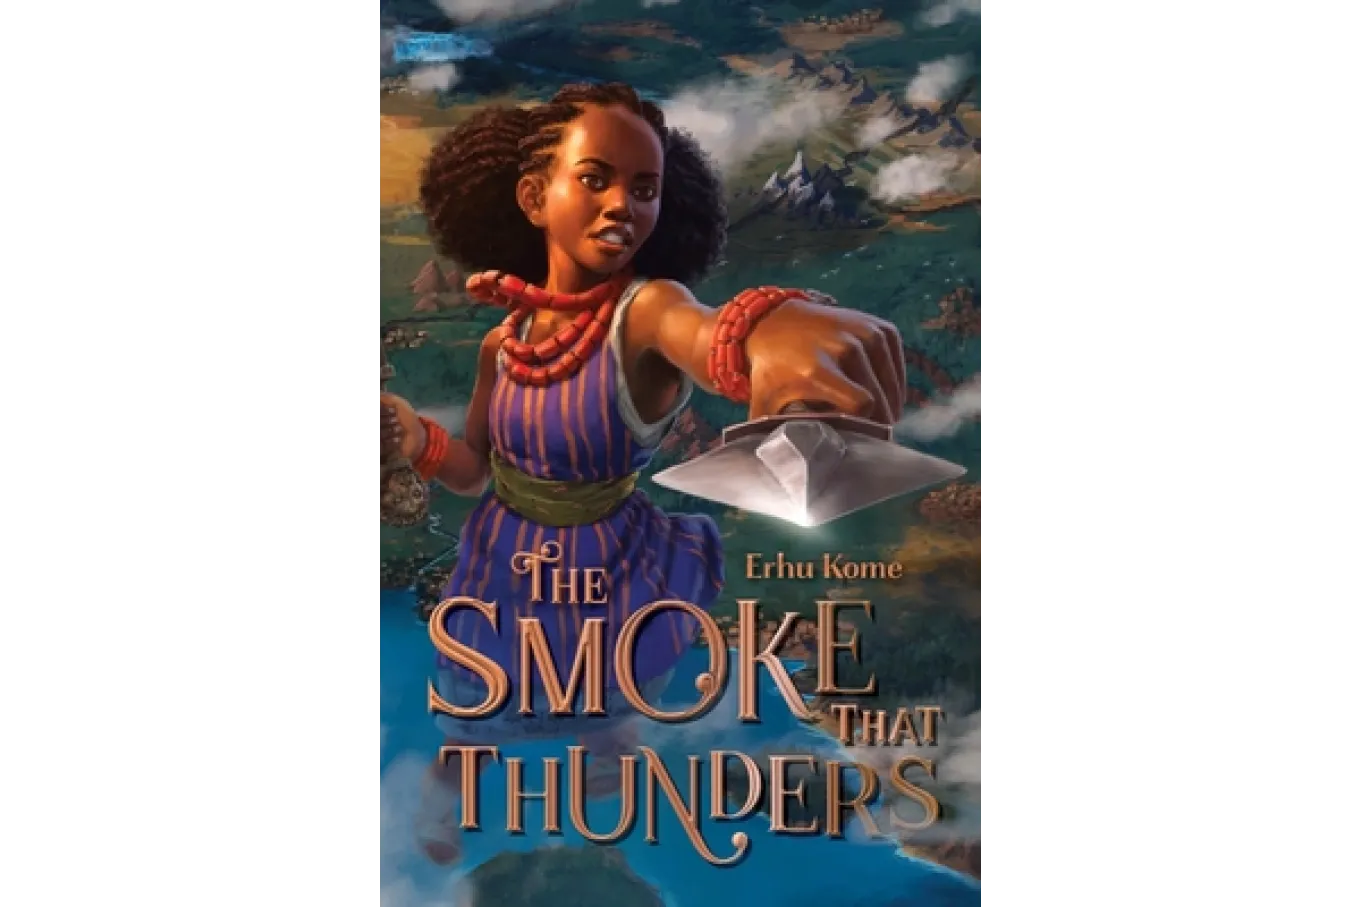 Cover of The Smoke That Thunders